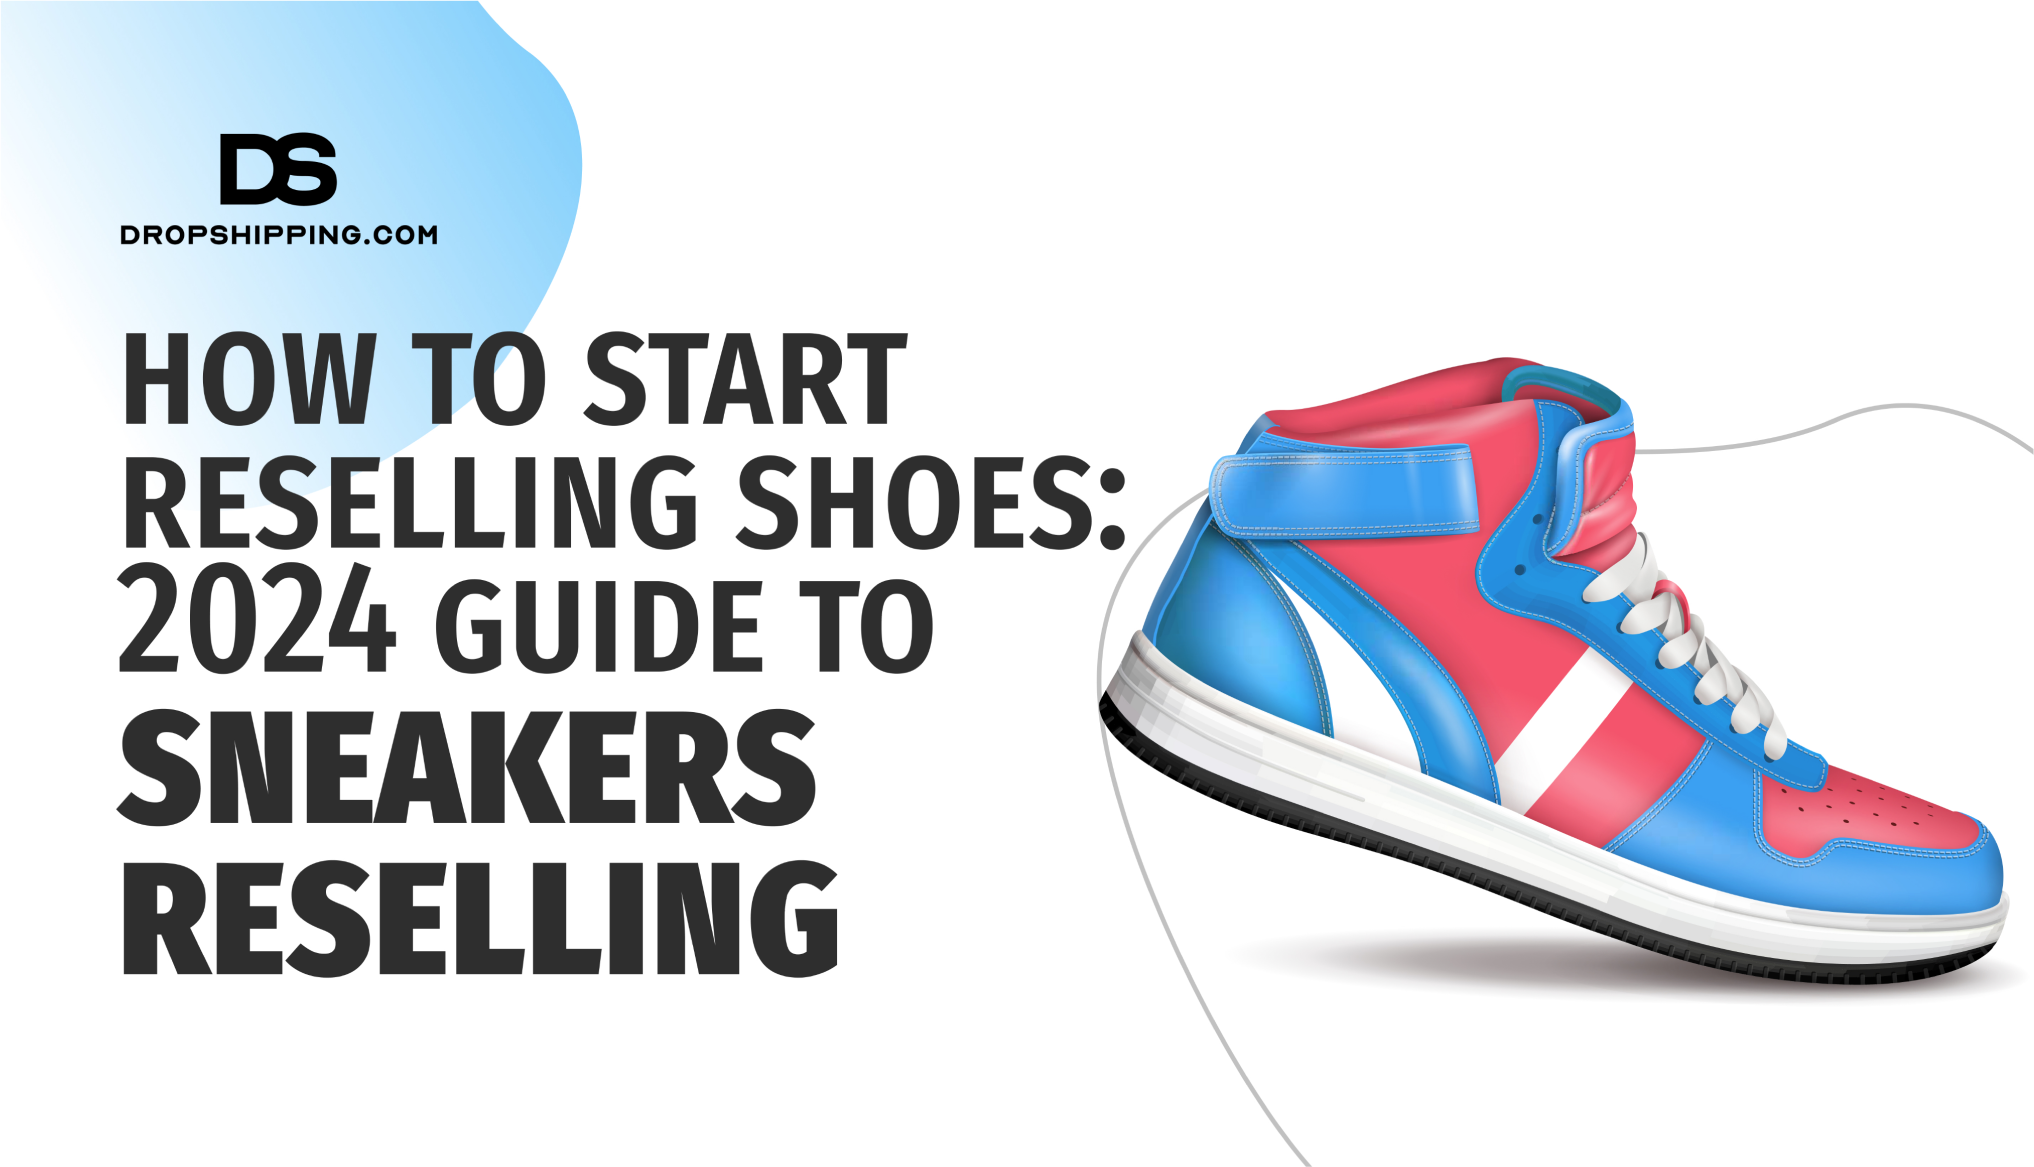 How To Start Reselling Shoes: 2024 Guide To Reselling Sneakers